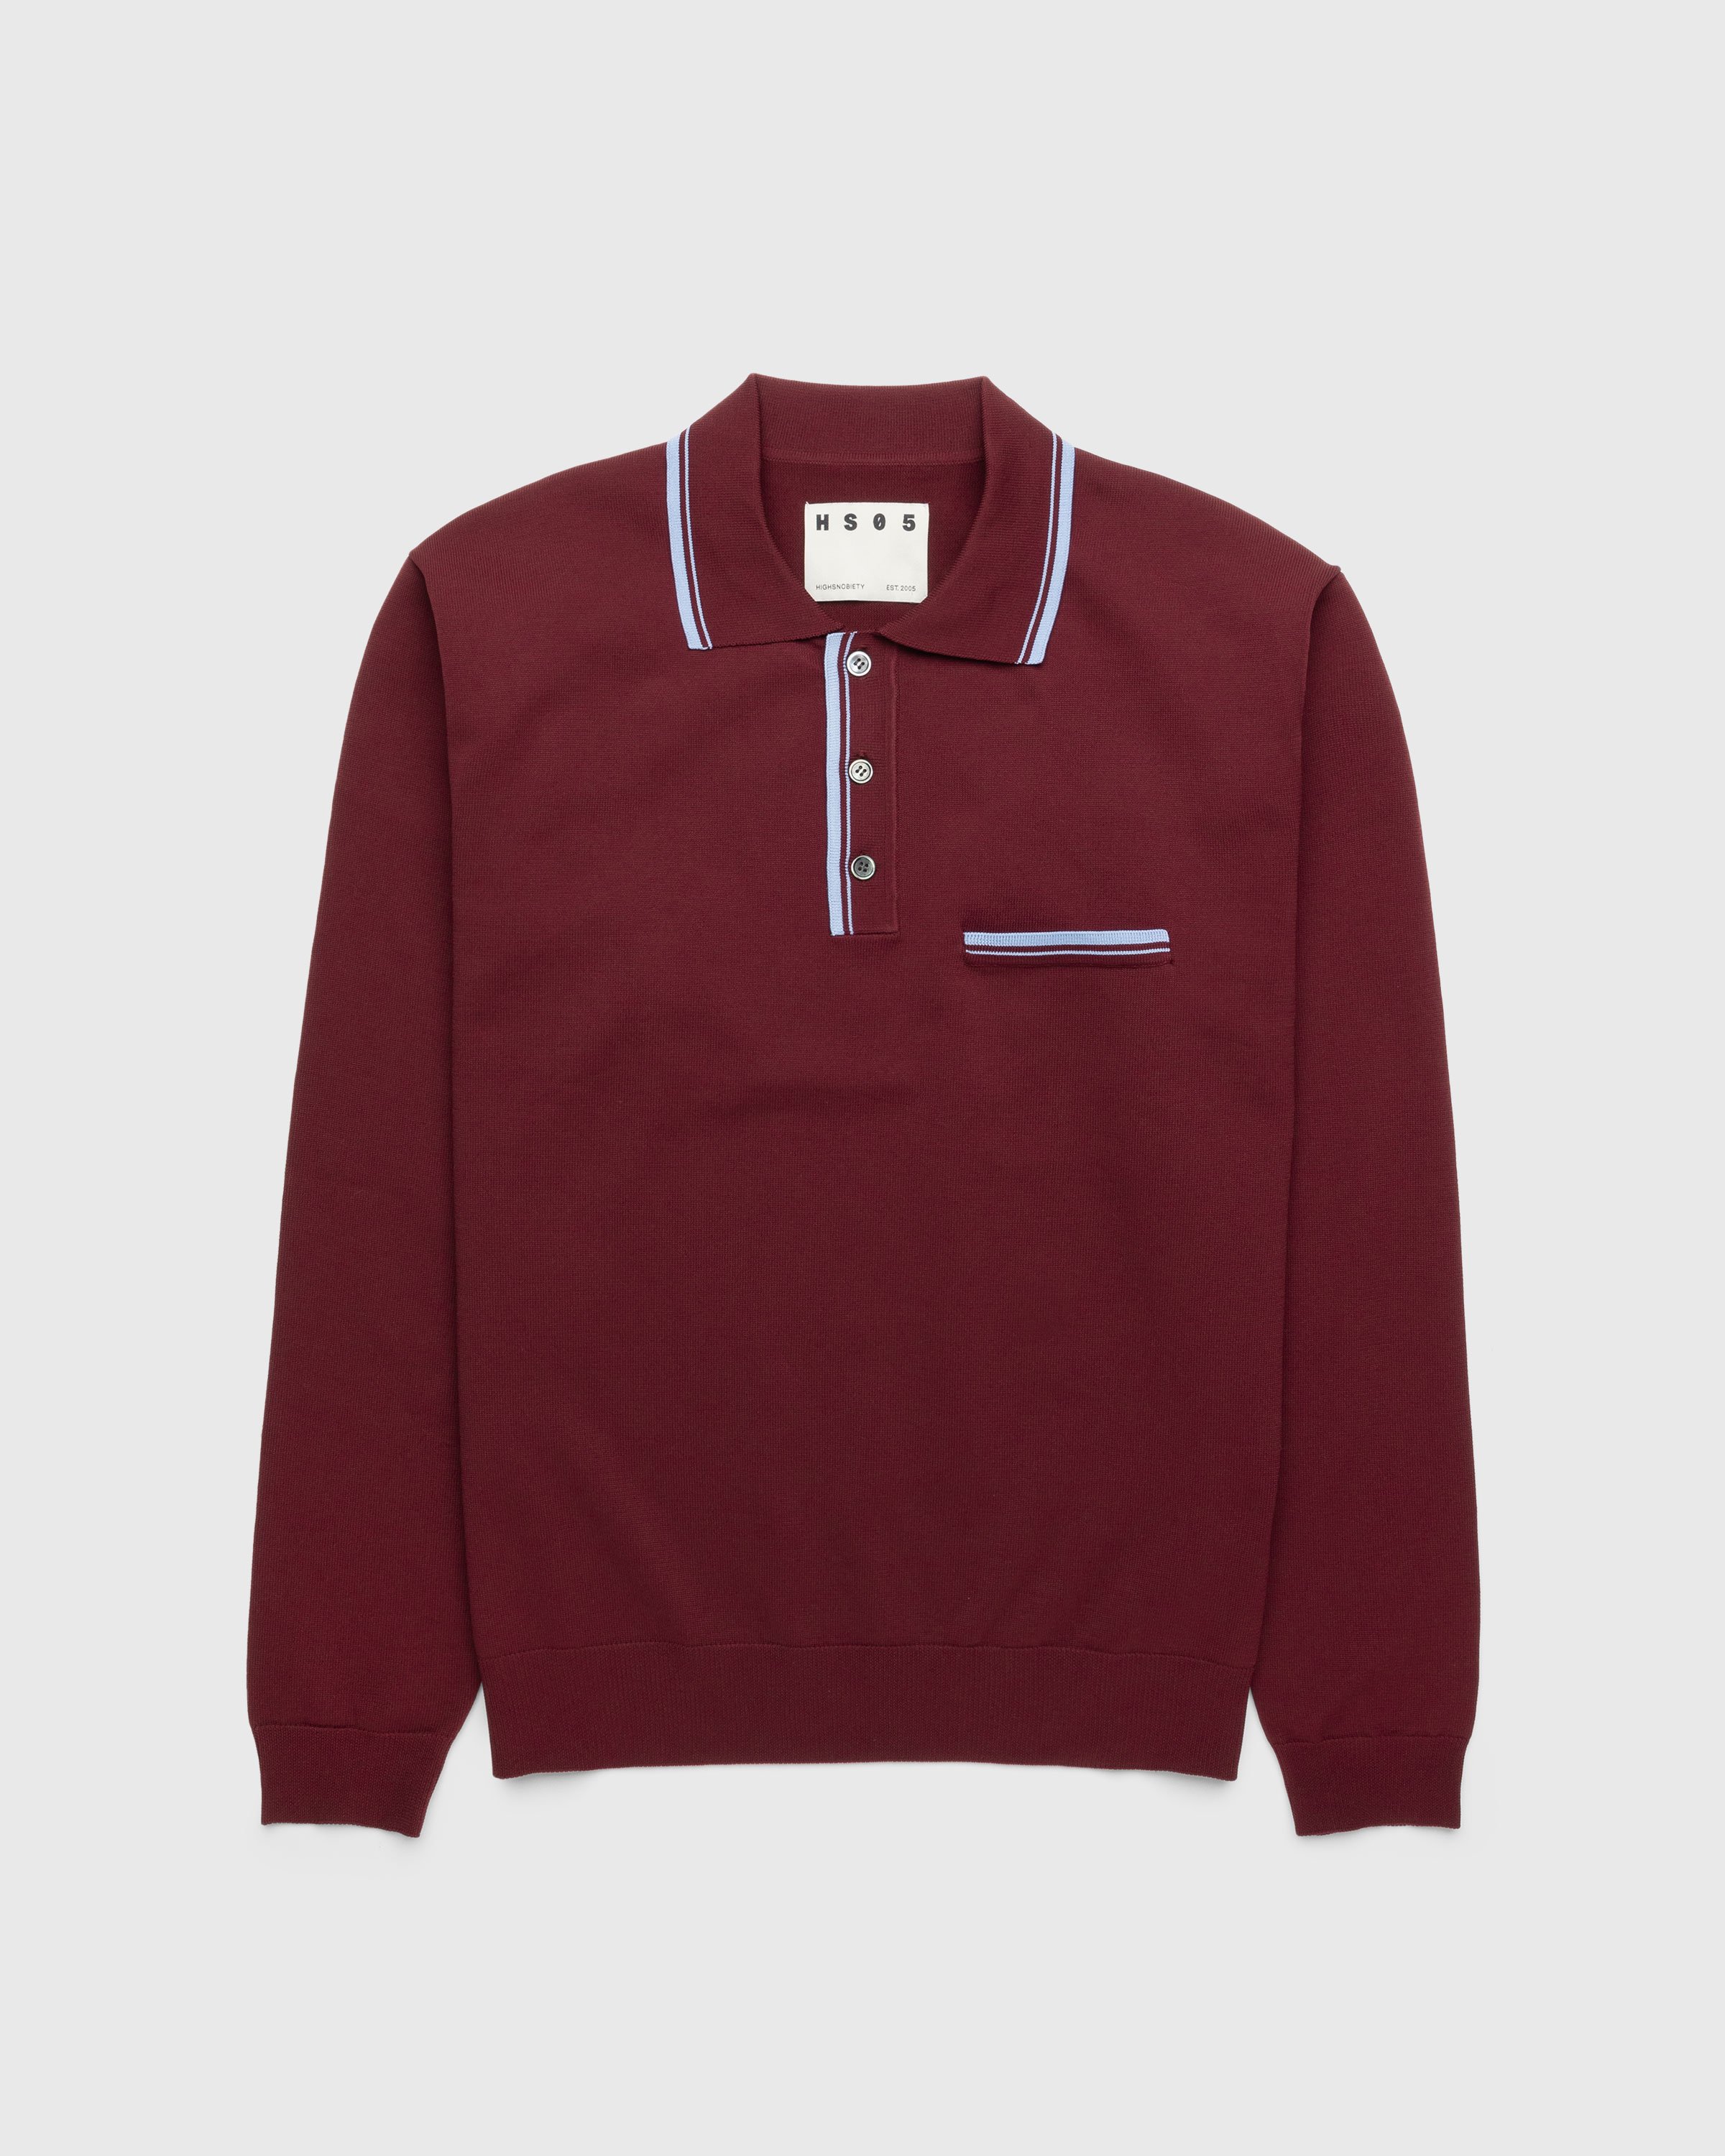 Highsnobiety HS05 - Long Sleeves Knit Polo Bordeaux - Clothing - Red - Image 1